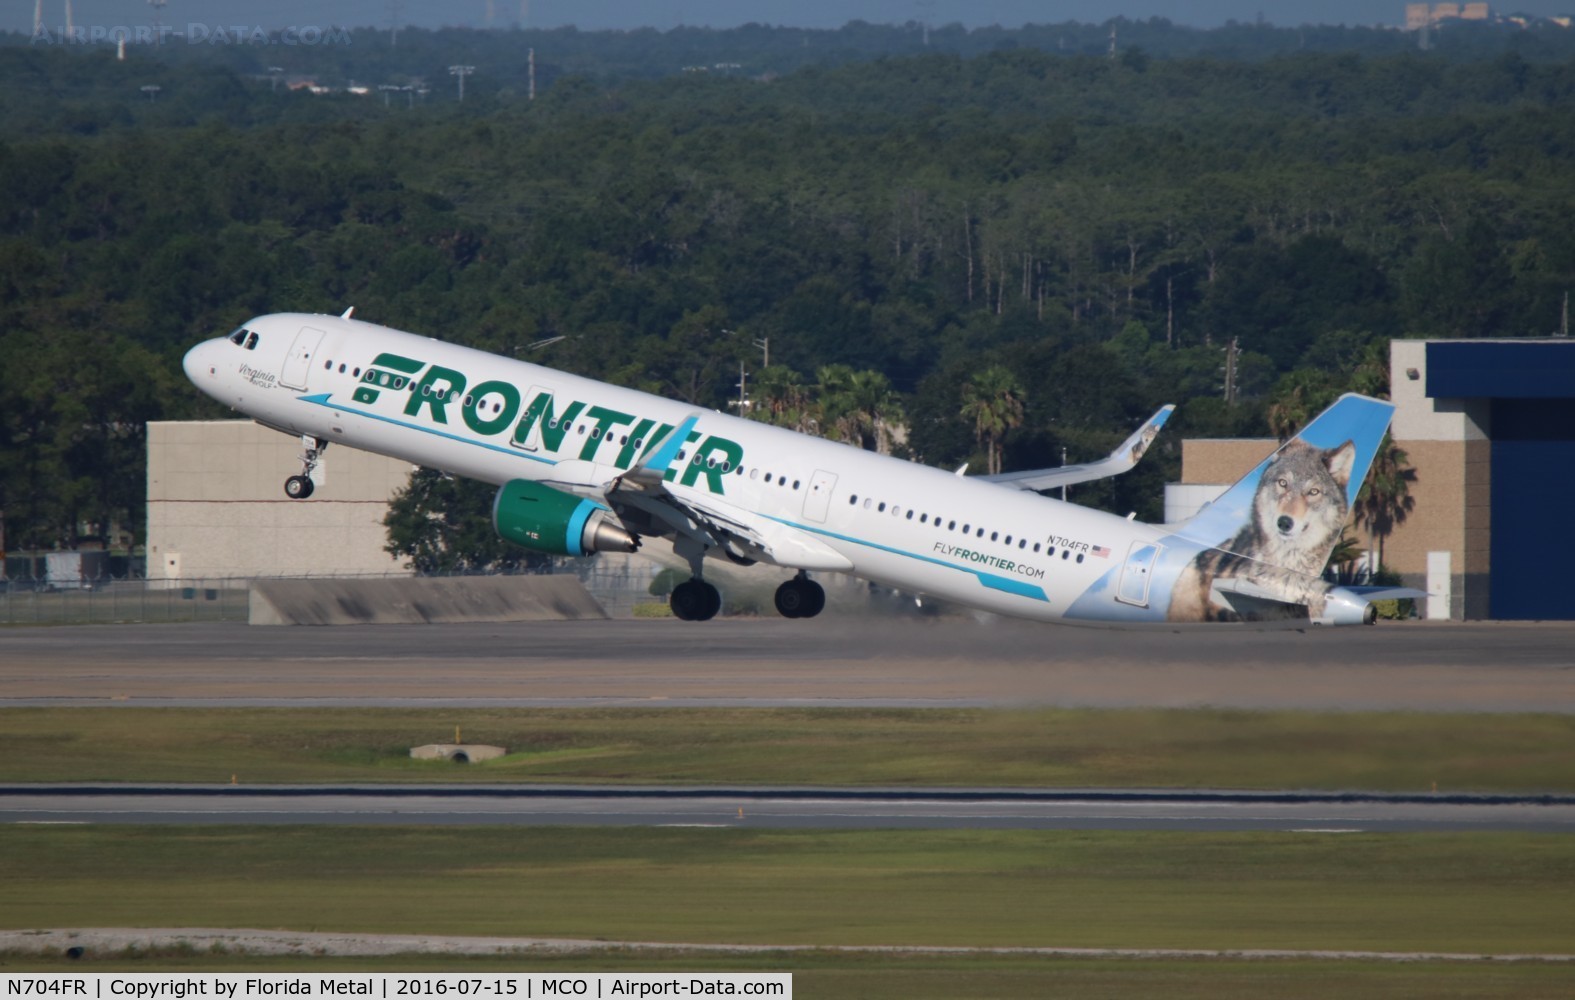 N704FR, 2015 Airbus A321-211 C/N 6845, Frontier Virginia the World